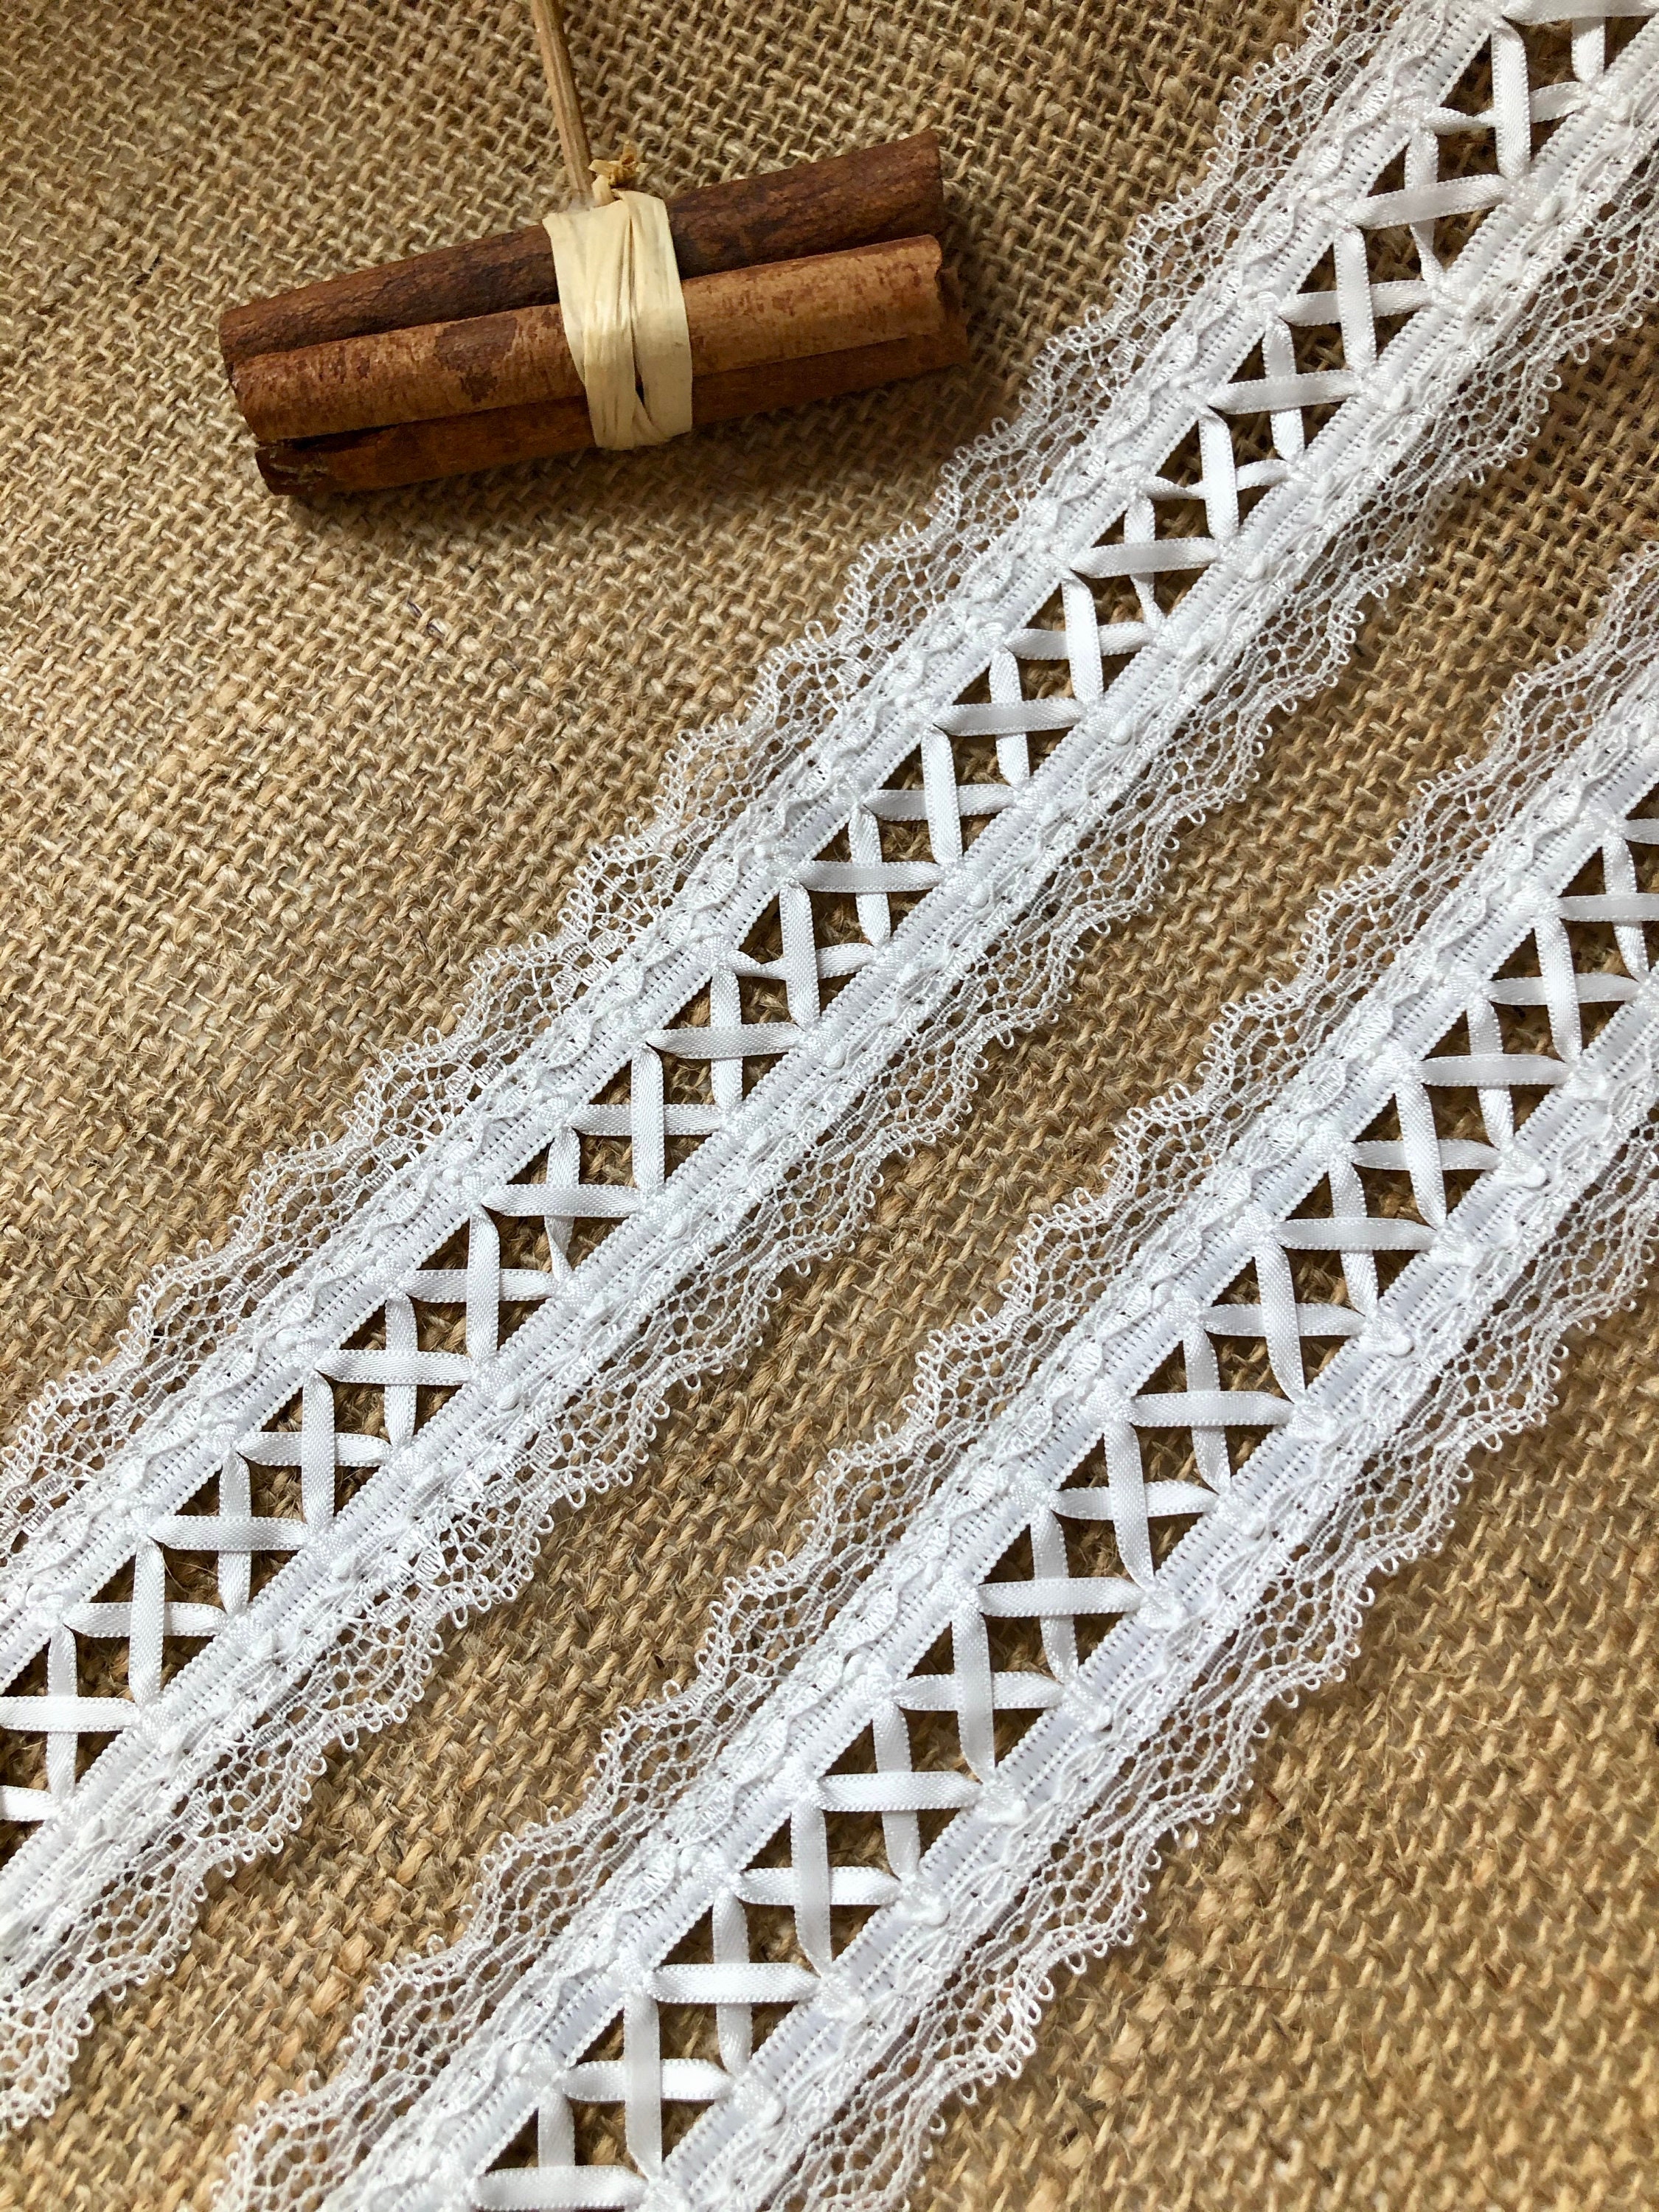  Thin Lace Ribbon for Crafts 1.7 Inch Wide Lace